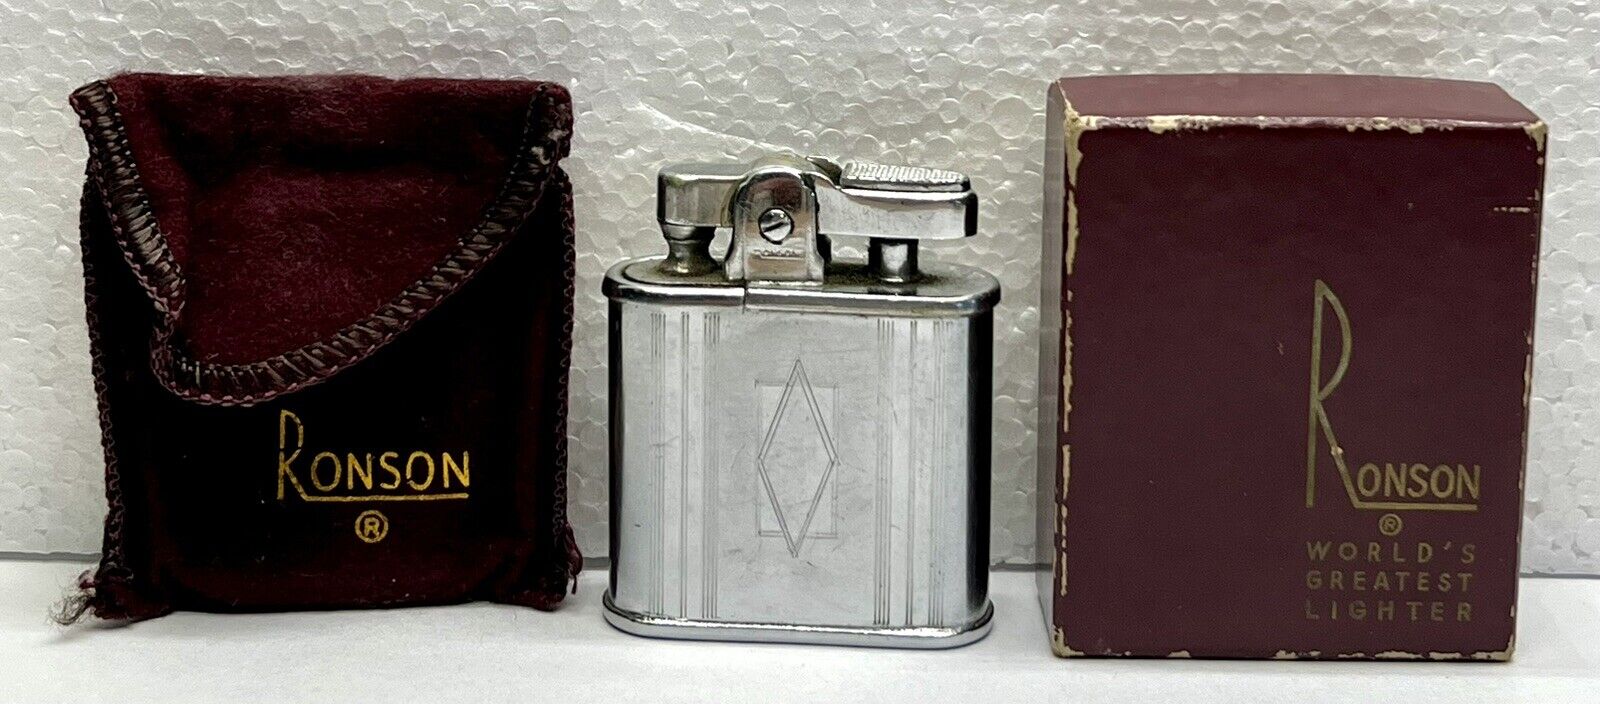 Vintage Ronson Lighter Silver With Original Box Collectible